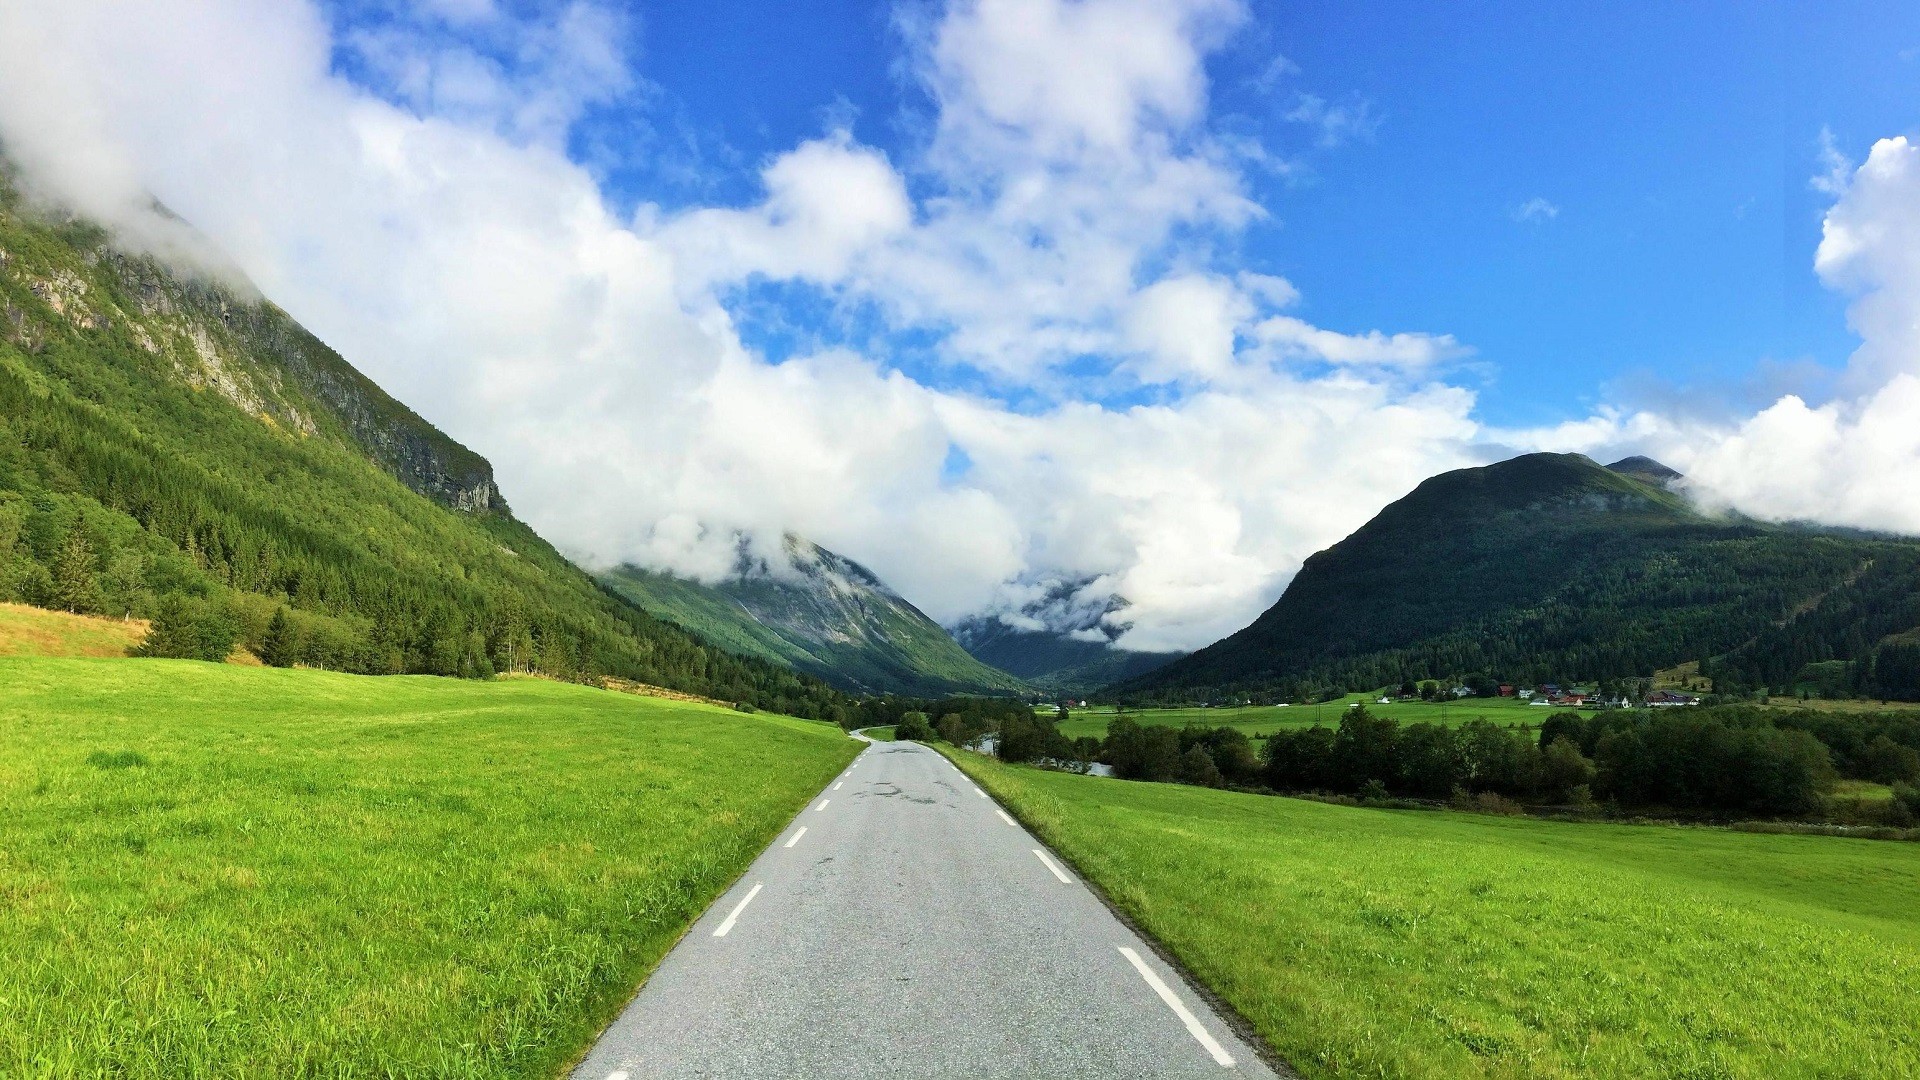 General 1920x1080 nature landscape mountains road Norway